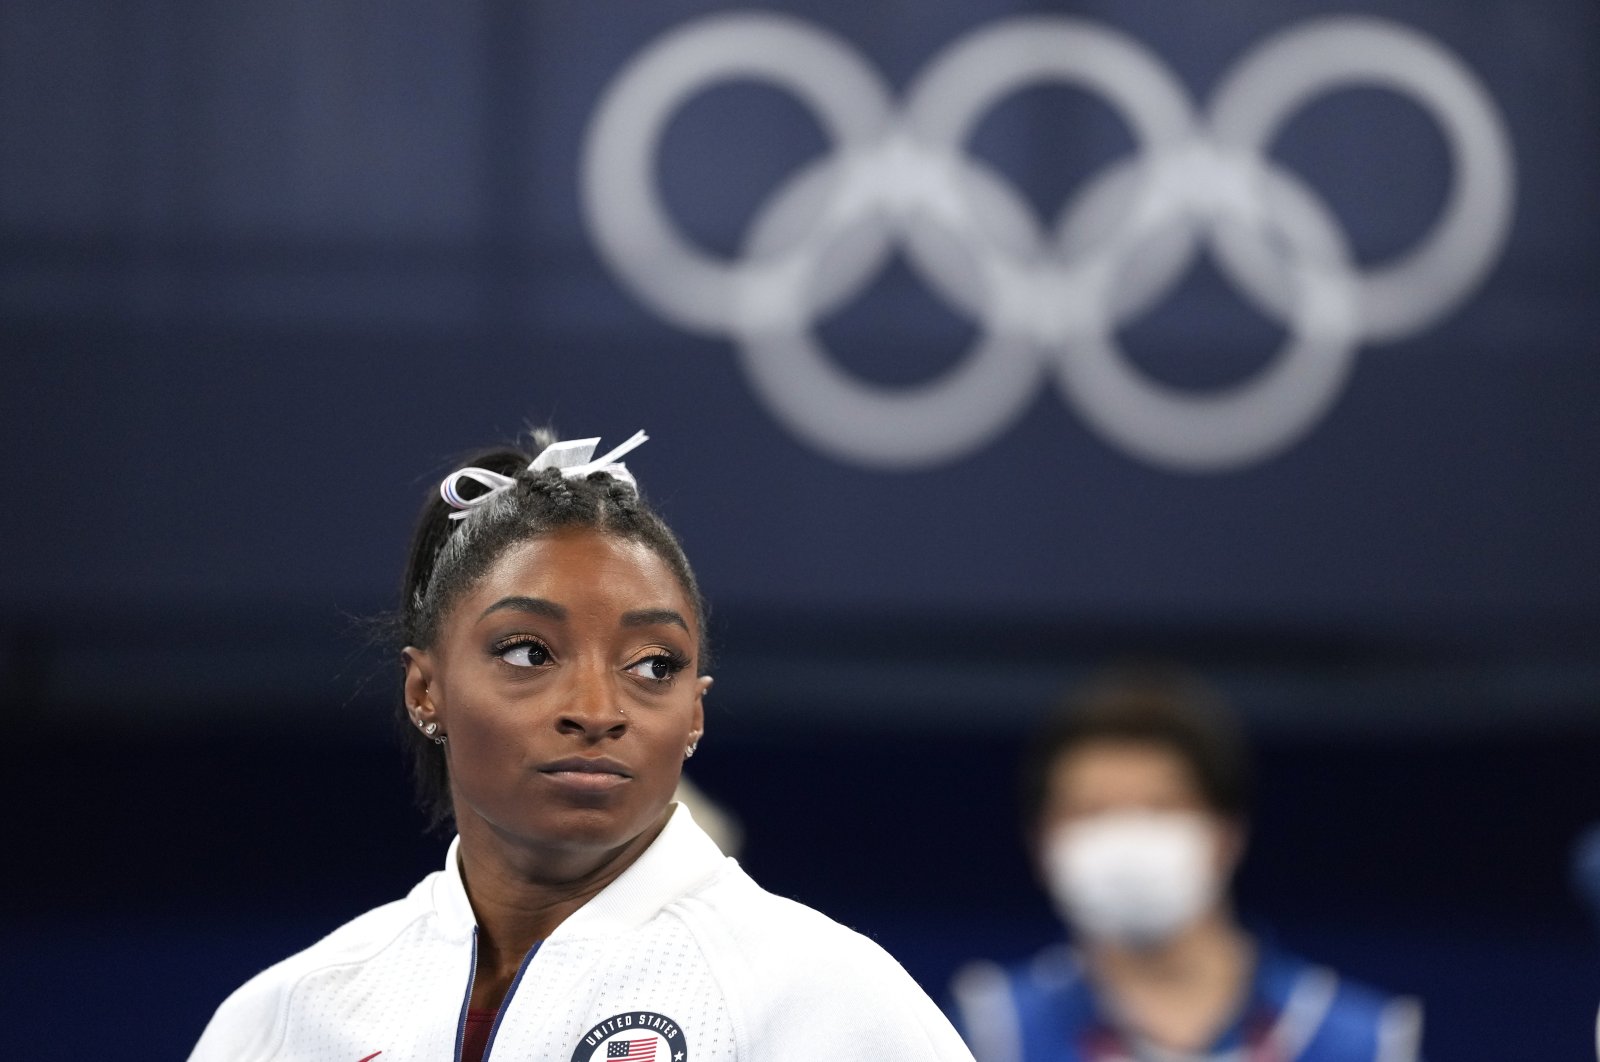 U.S.'s Simone Biles watches gymnasts perform after she exited the team final with an apparent injury, at the 2020 Summer Olympics, Tokyo, Japan, July 27, 2021. (AP Photo)